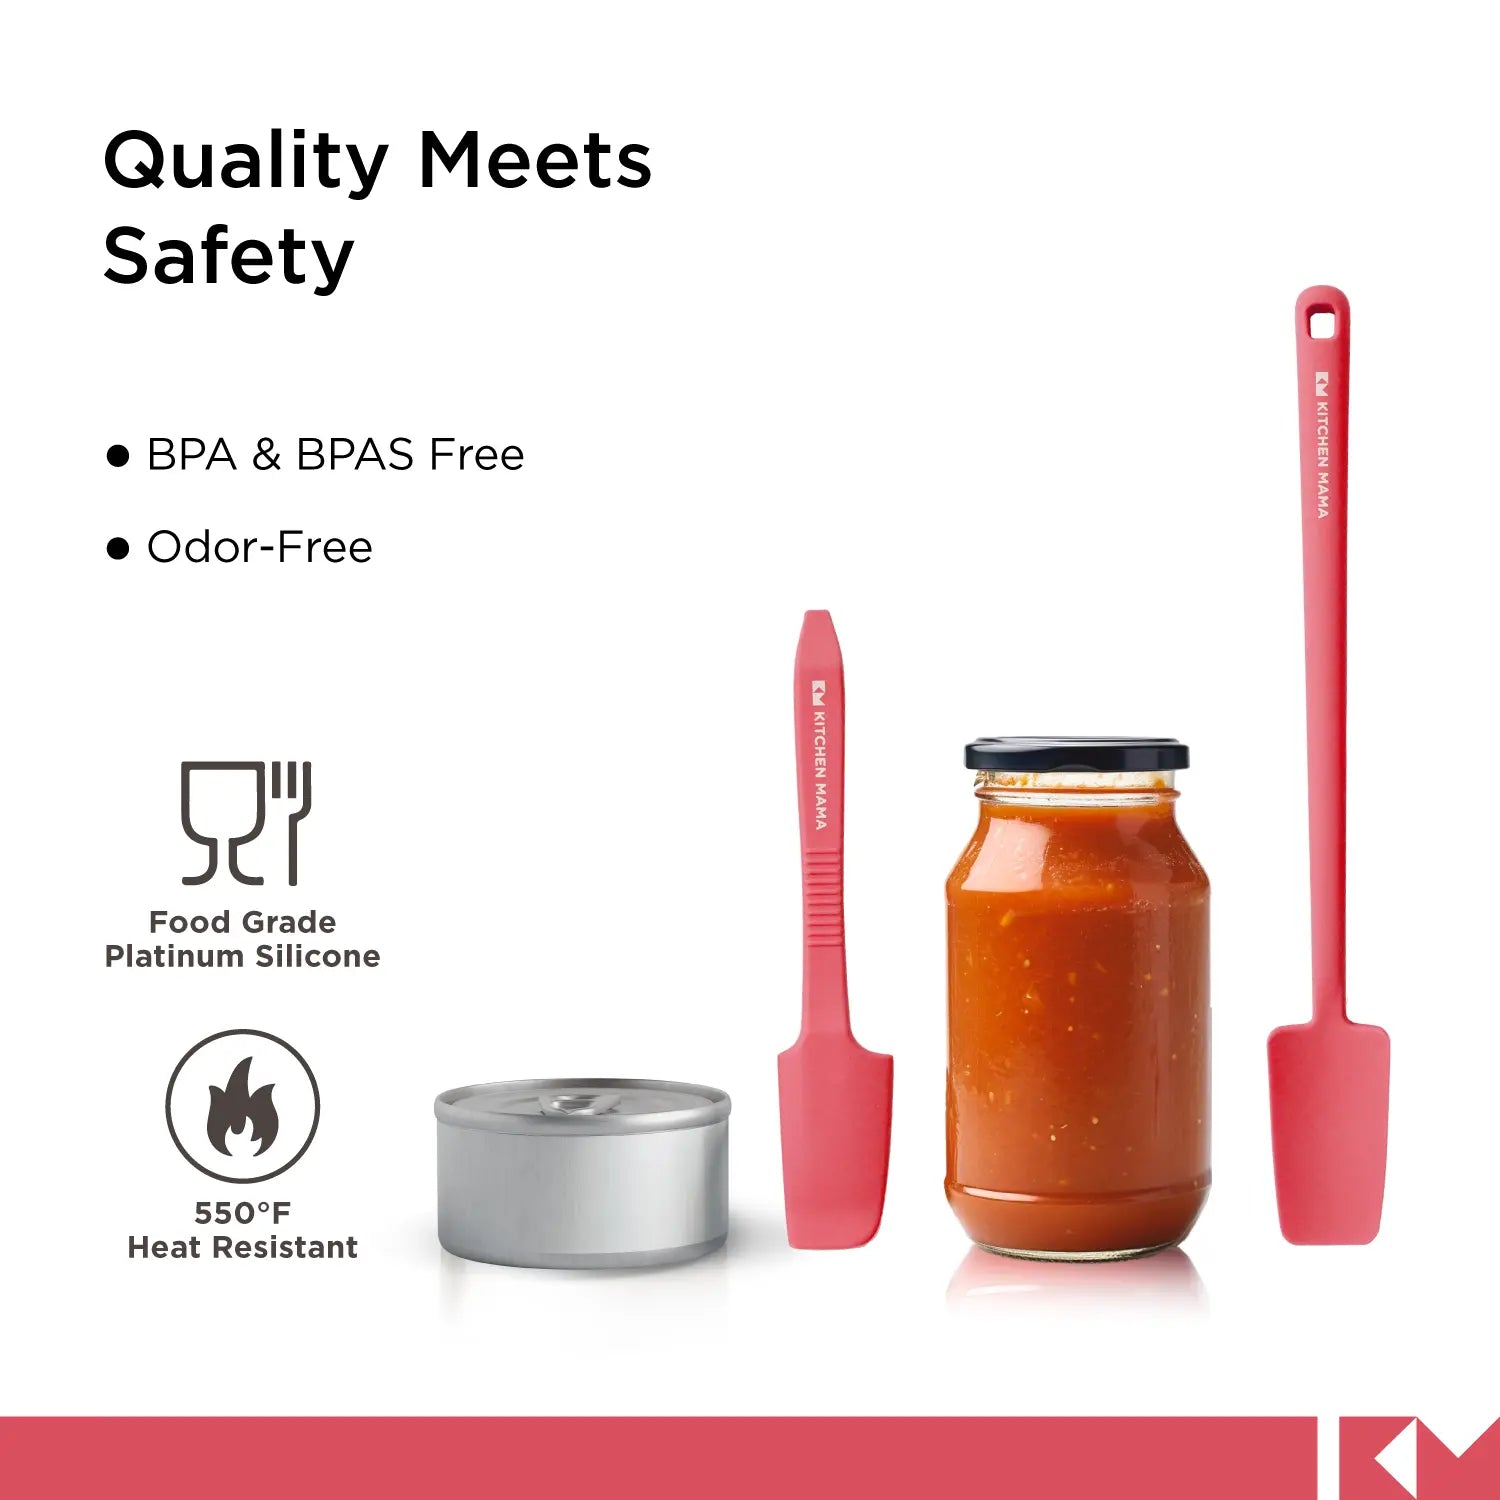 Silicone Jar & Can Spatulas, SP0420-R, Red, quality meets safety, BPA and BPAS Free, Odor-Free, food grade platinum silicone